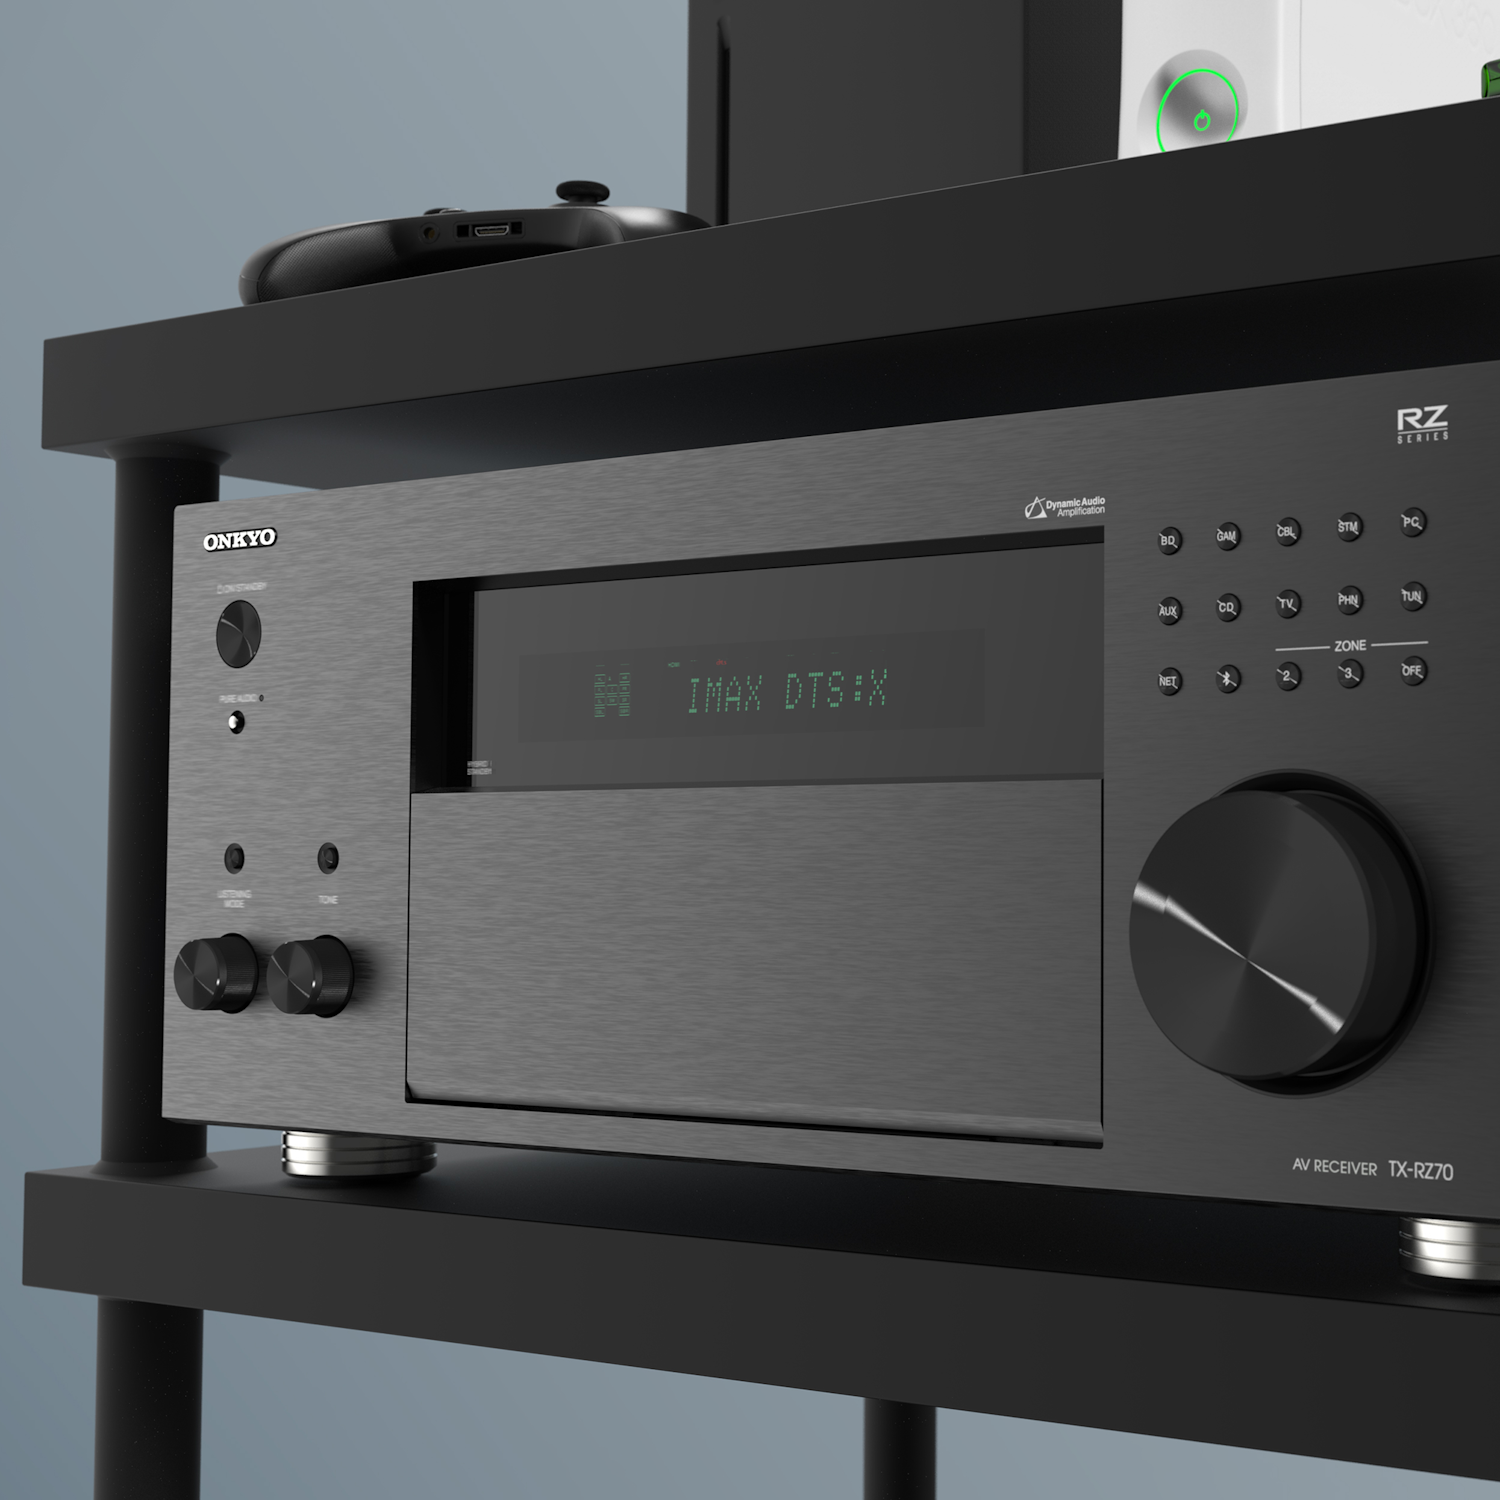 onkyo receiver and speaker system